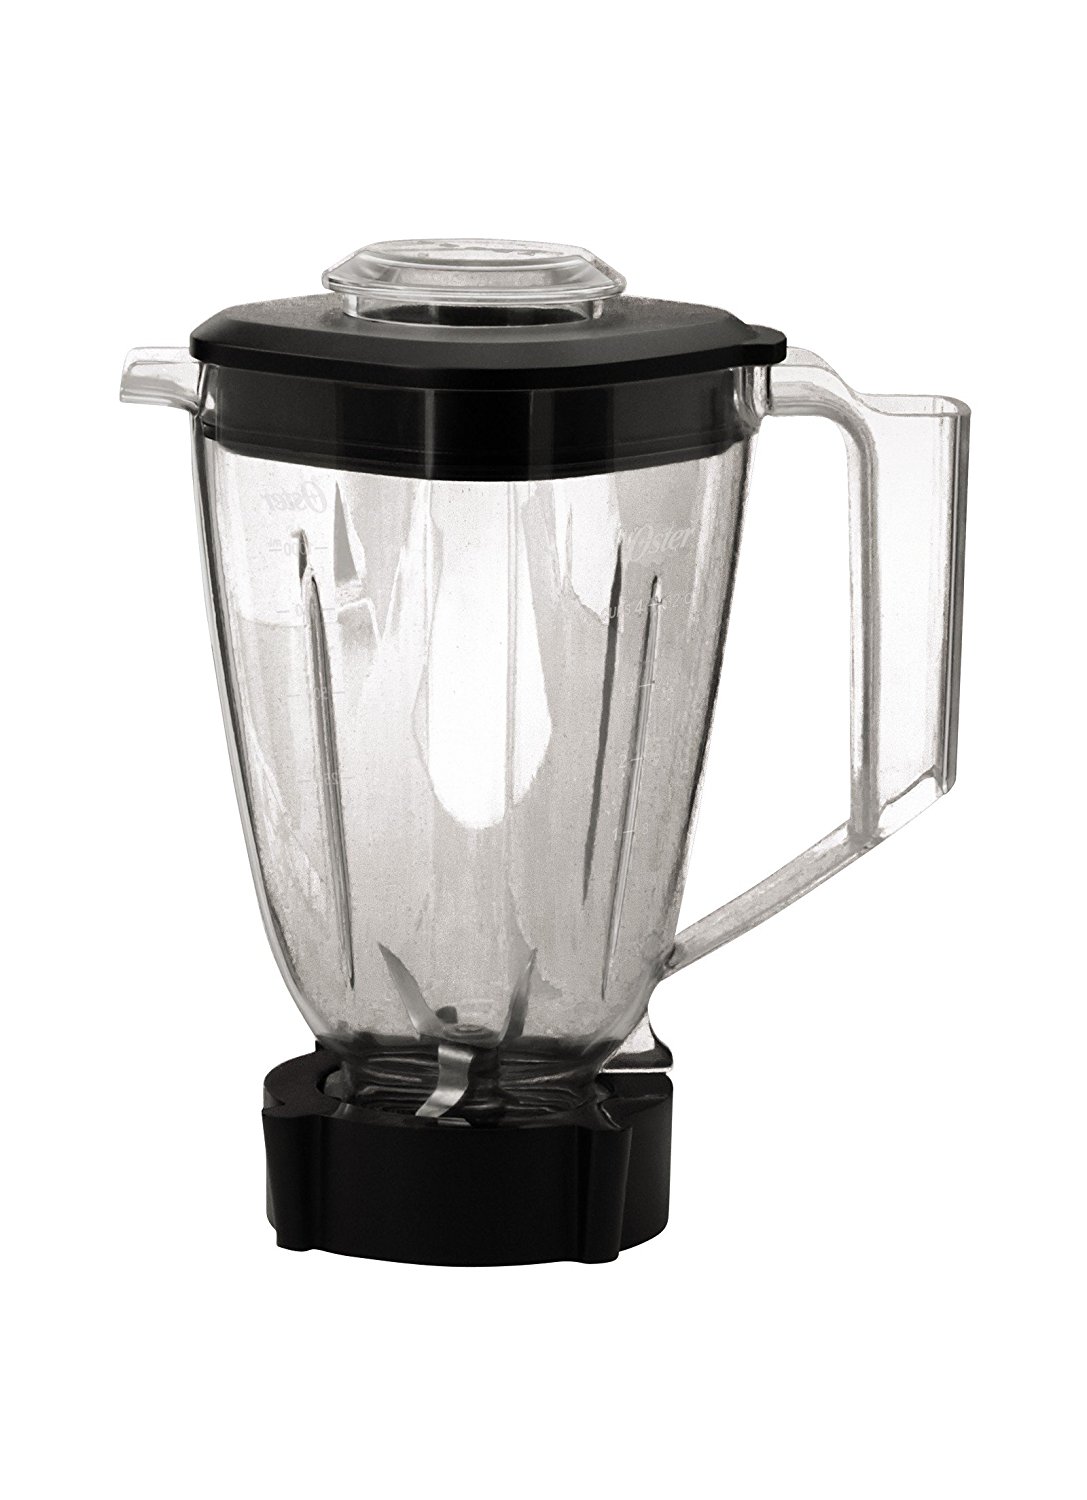 Oster Versa 1100 Series Performance Red Variable Speed Blender - image 3 of 7